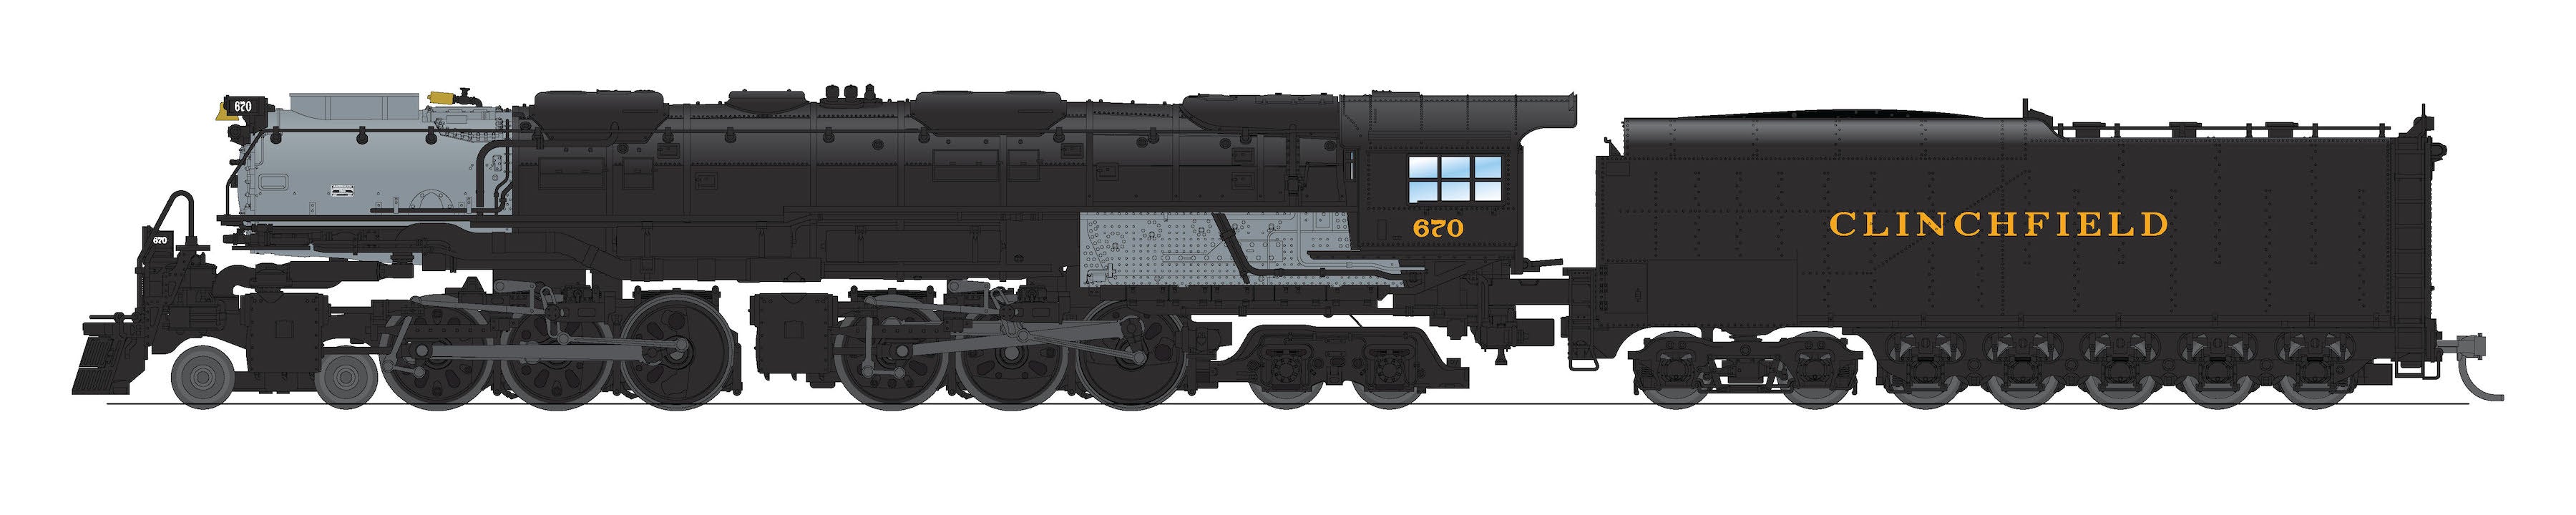 8660 Clinchfield Challenger 4-6-6-4, #674, Black & Graphite, Coal Tender, No-Sound / DCC-Ready, N